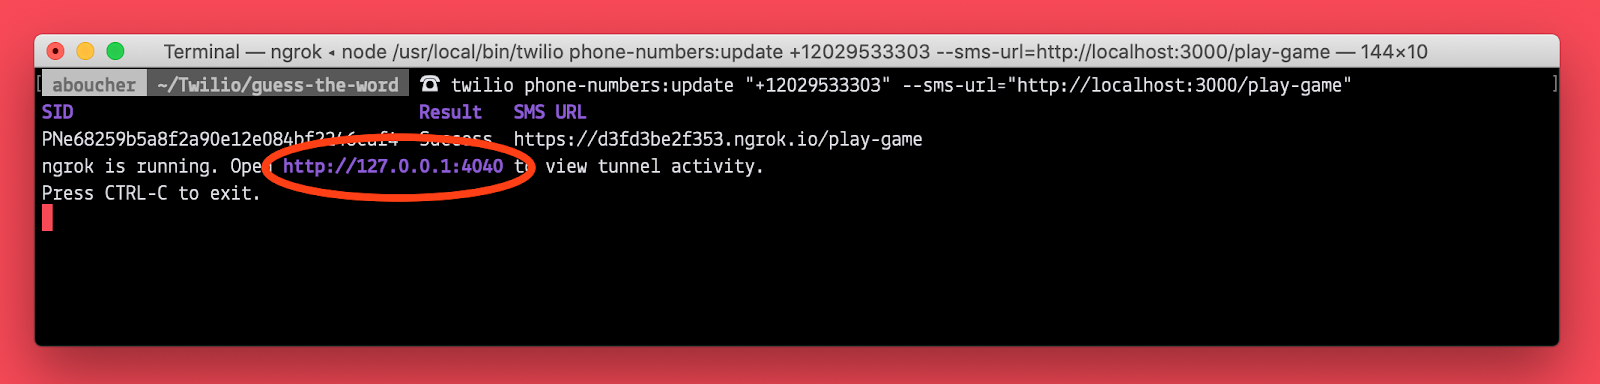 Screenshot of twilio CLI command line response with URL highlighted